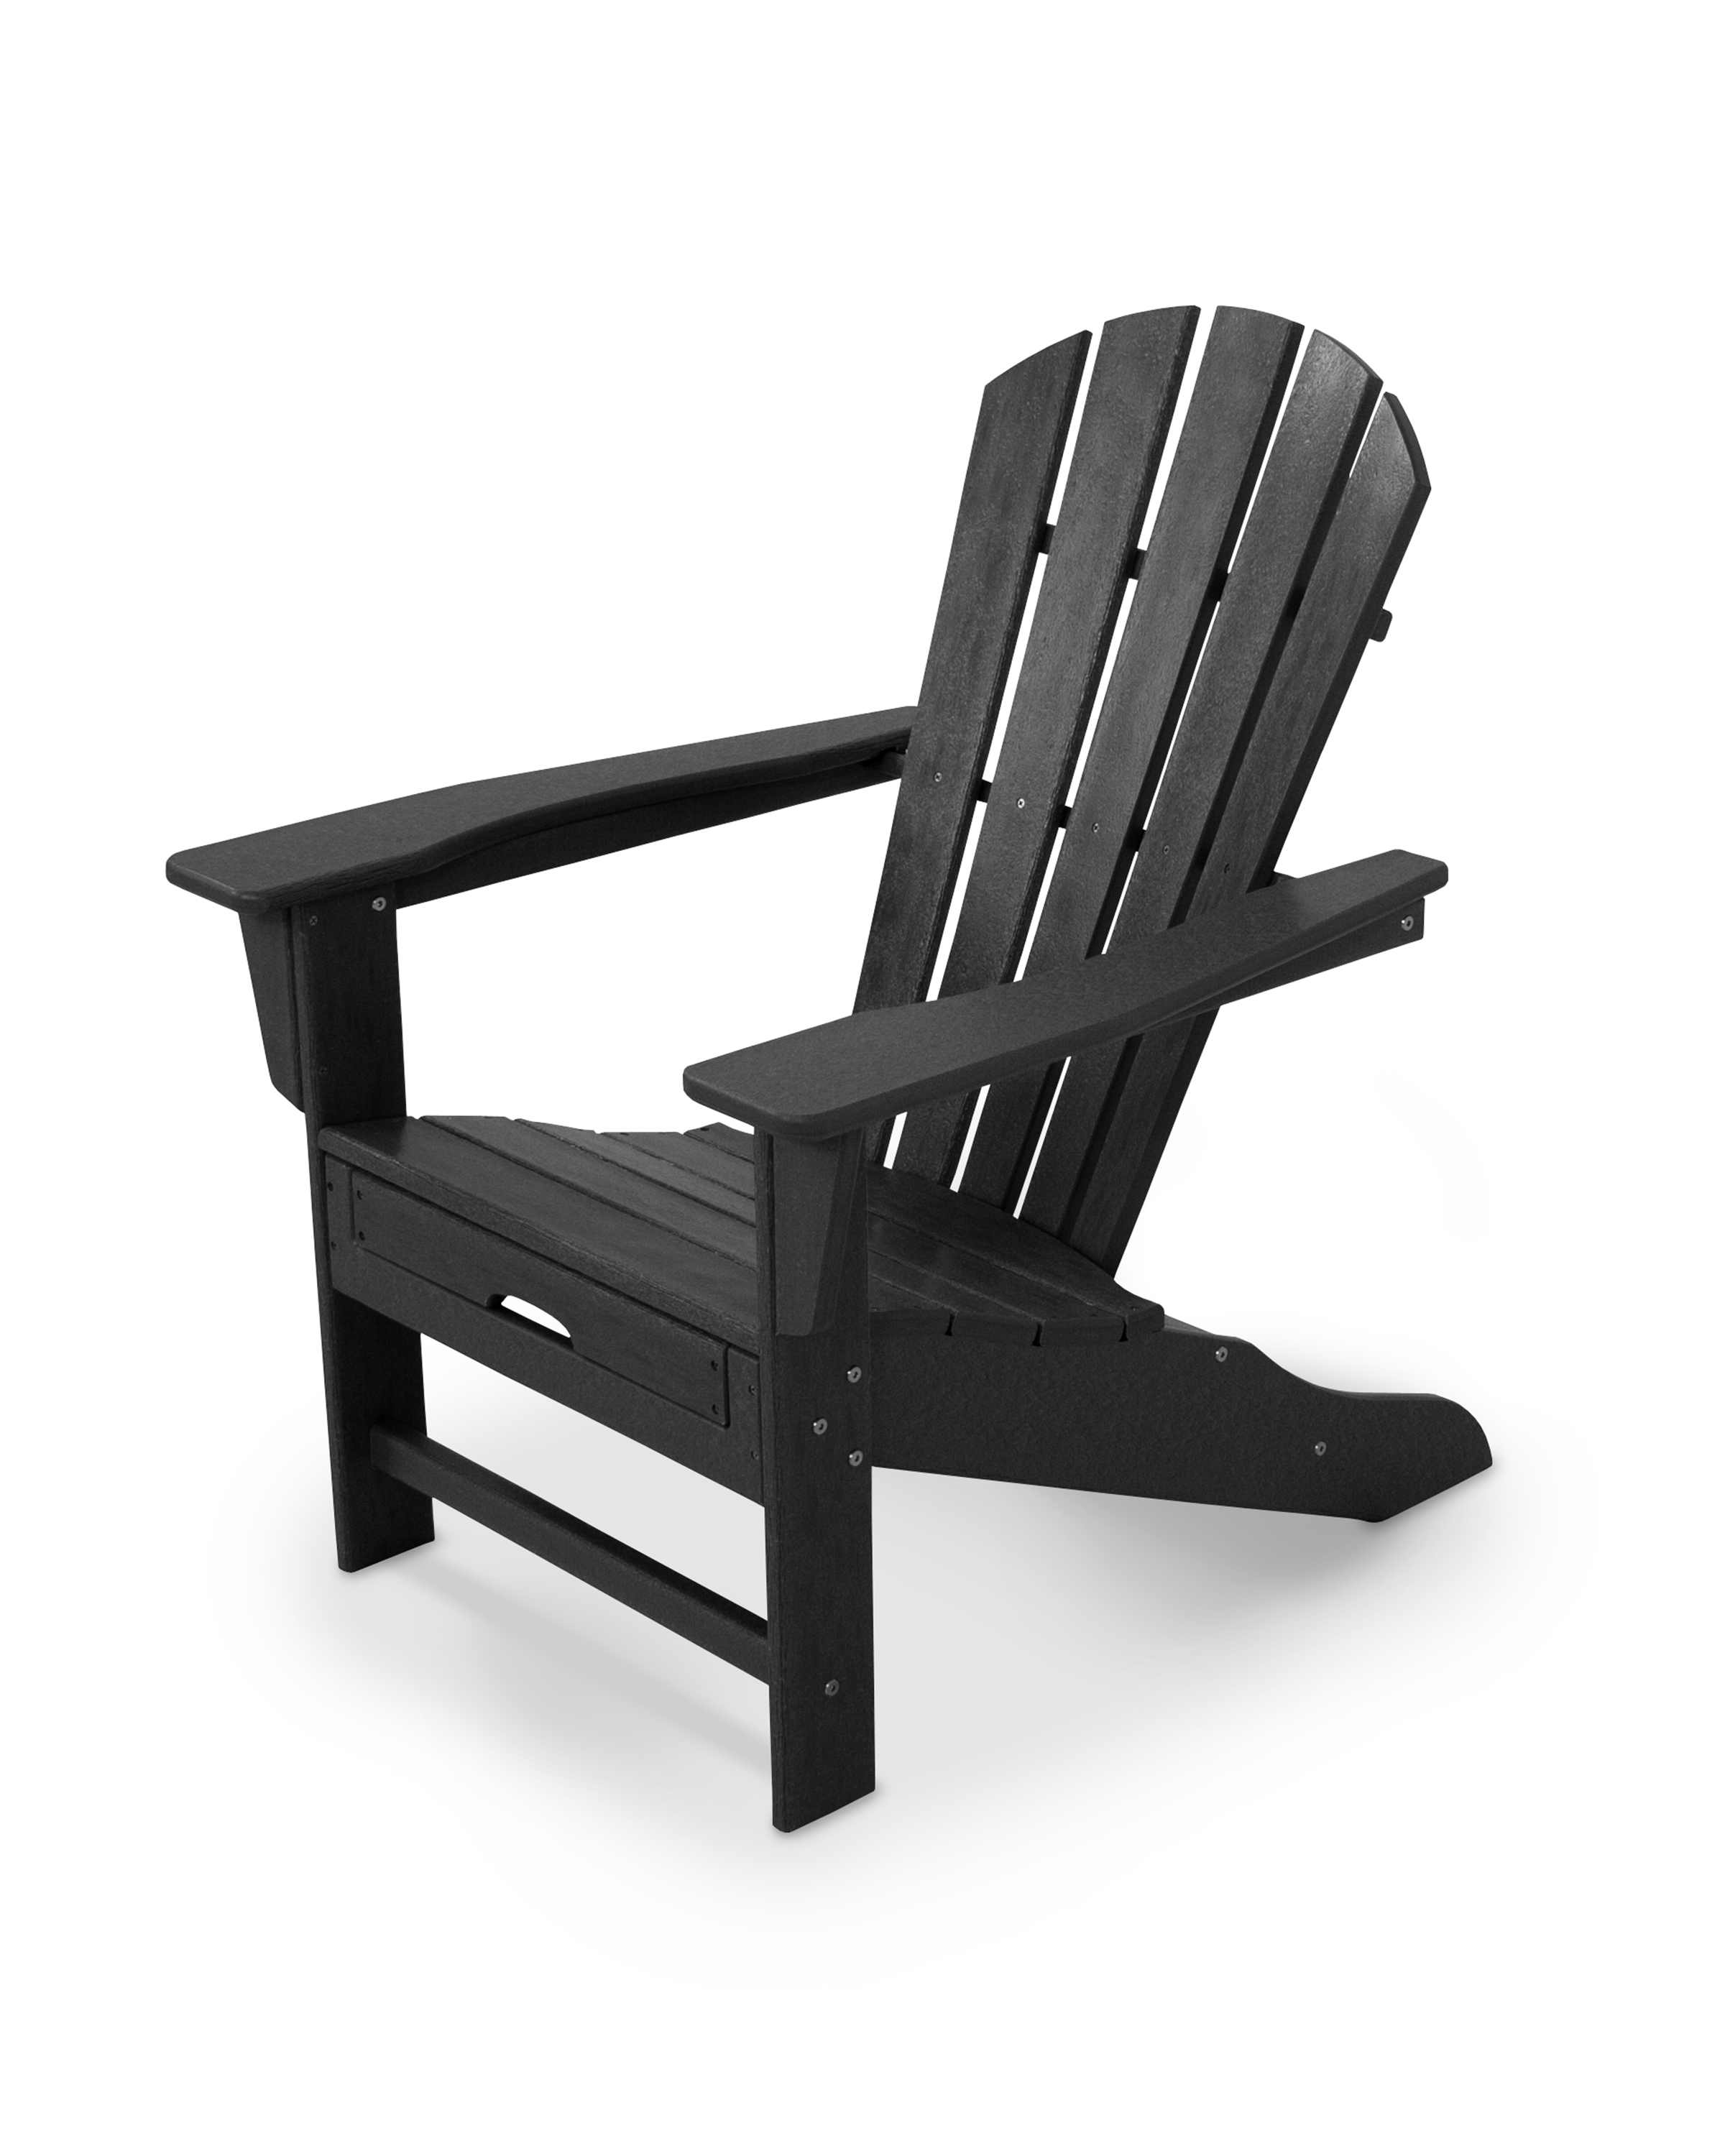 palm coast ultimate adirondack with hideaway ottoman in black thumbnail image